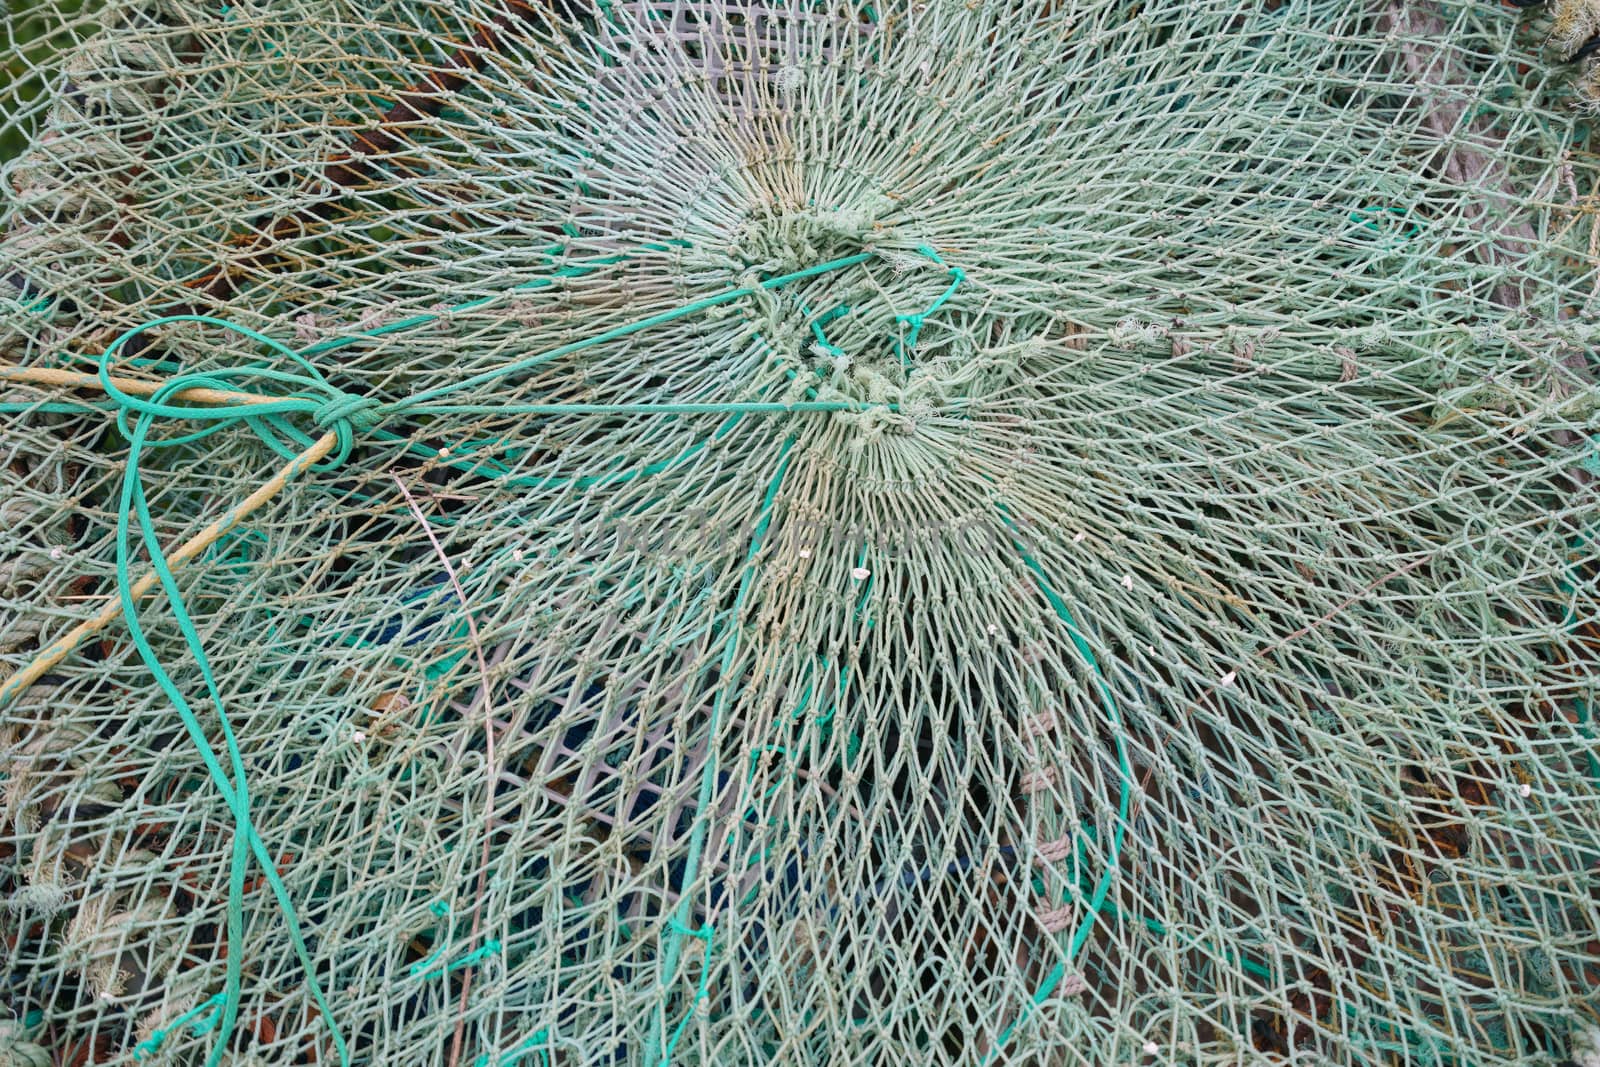 An image of a fish trap